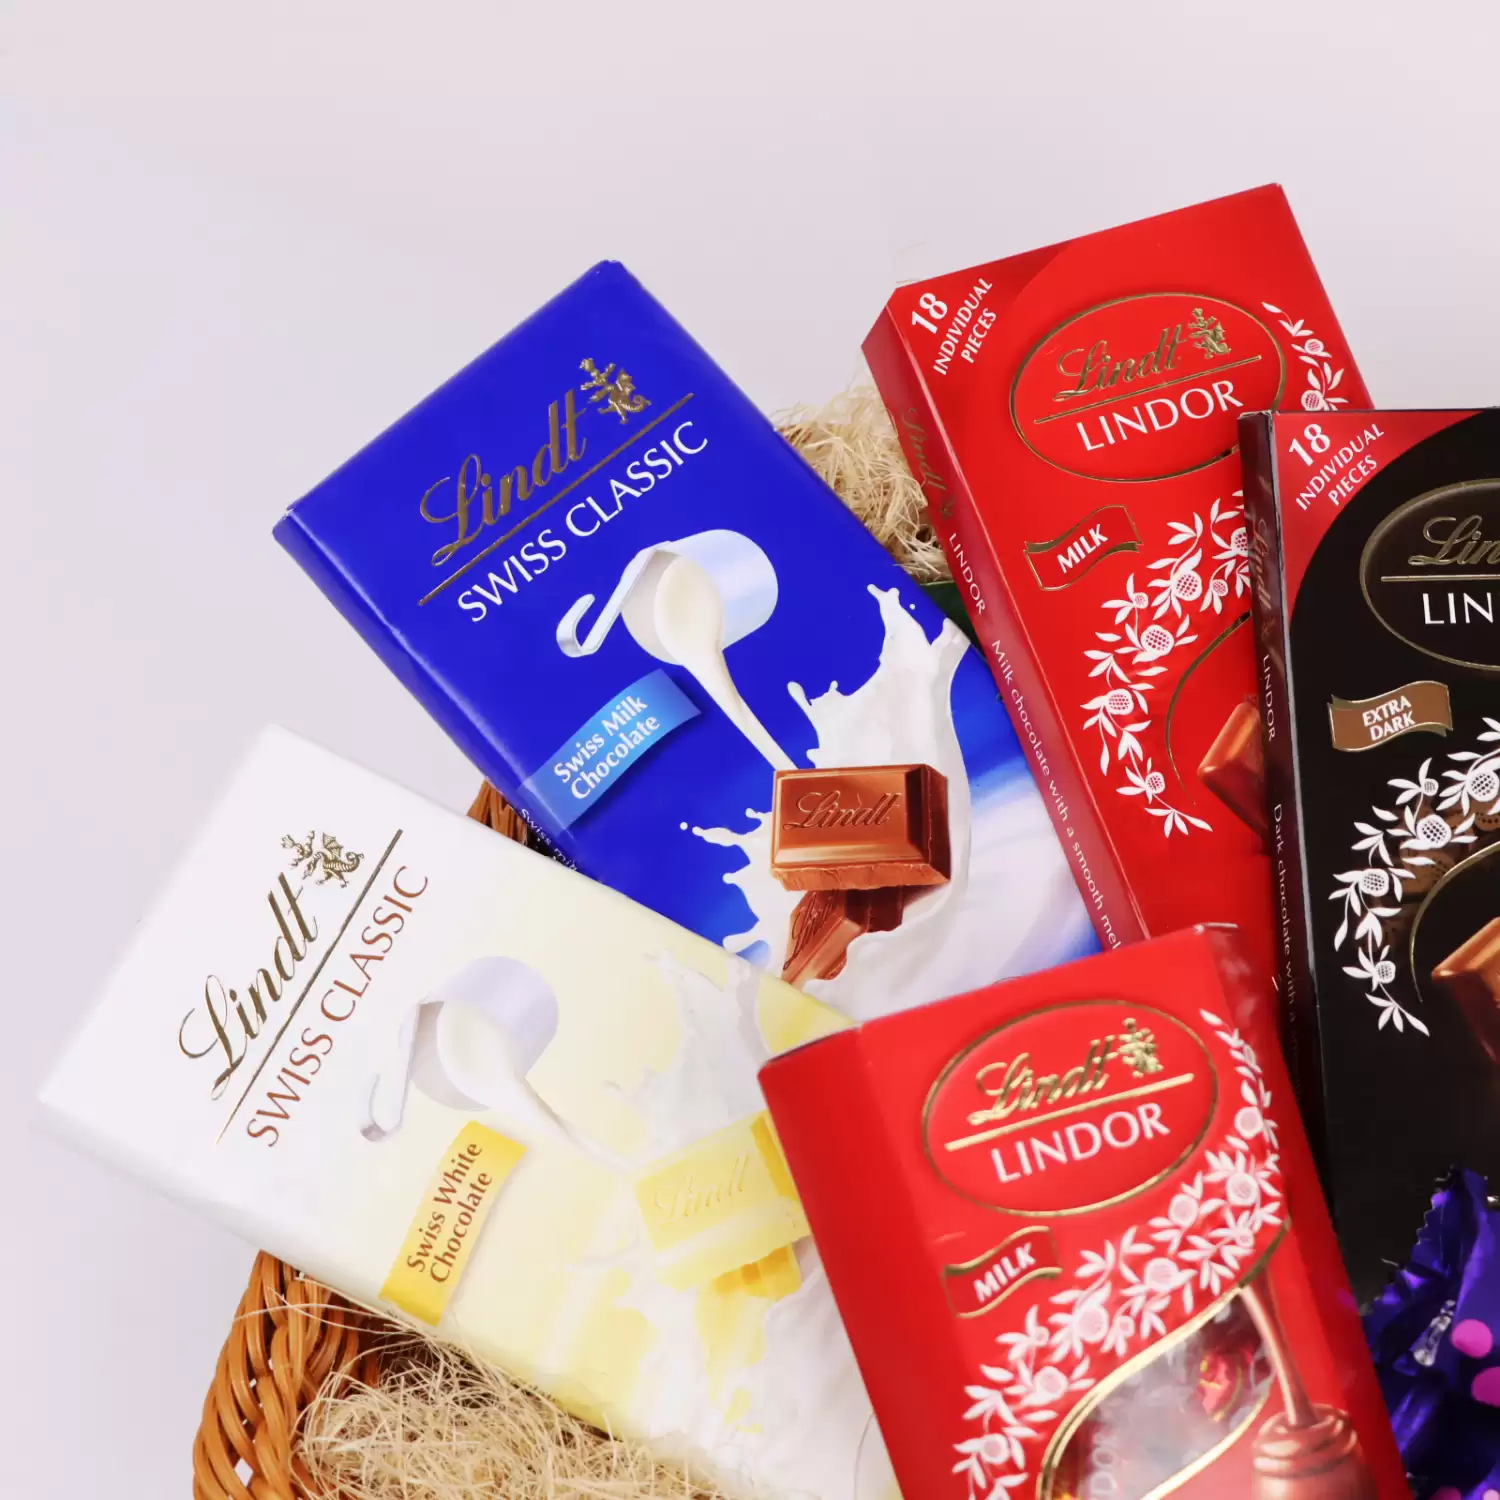 Assorted Choco Hamper | Buy Chocolates Online | Gifts Delivery Bahrain - Flora D'lite